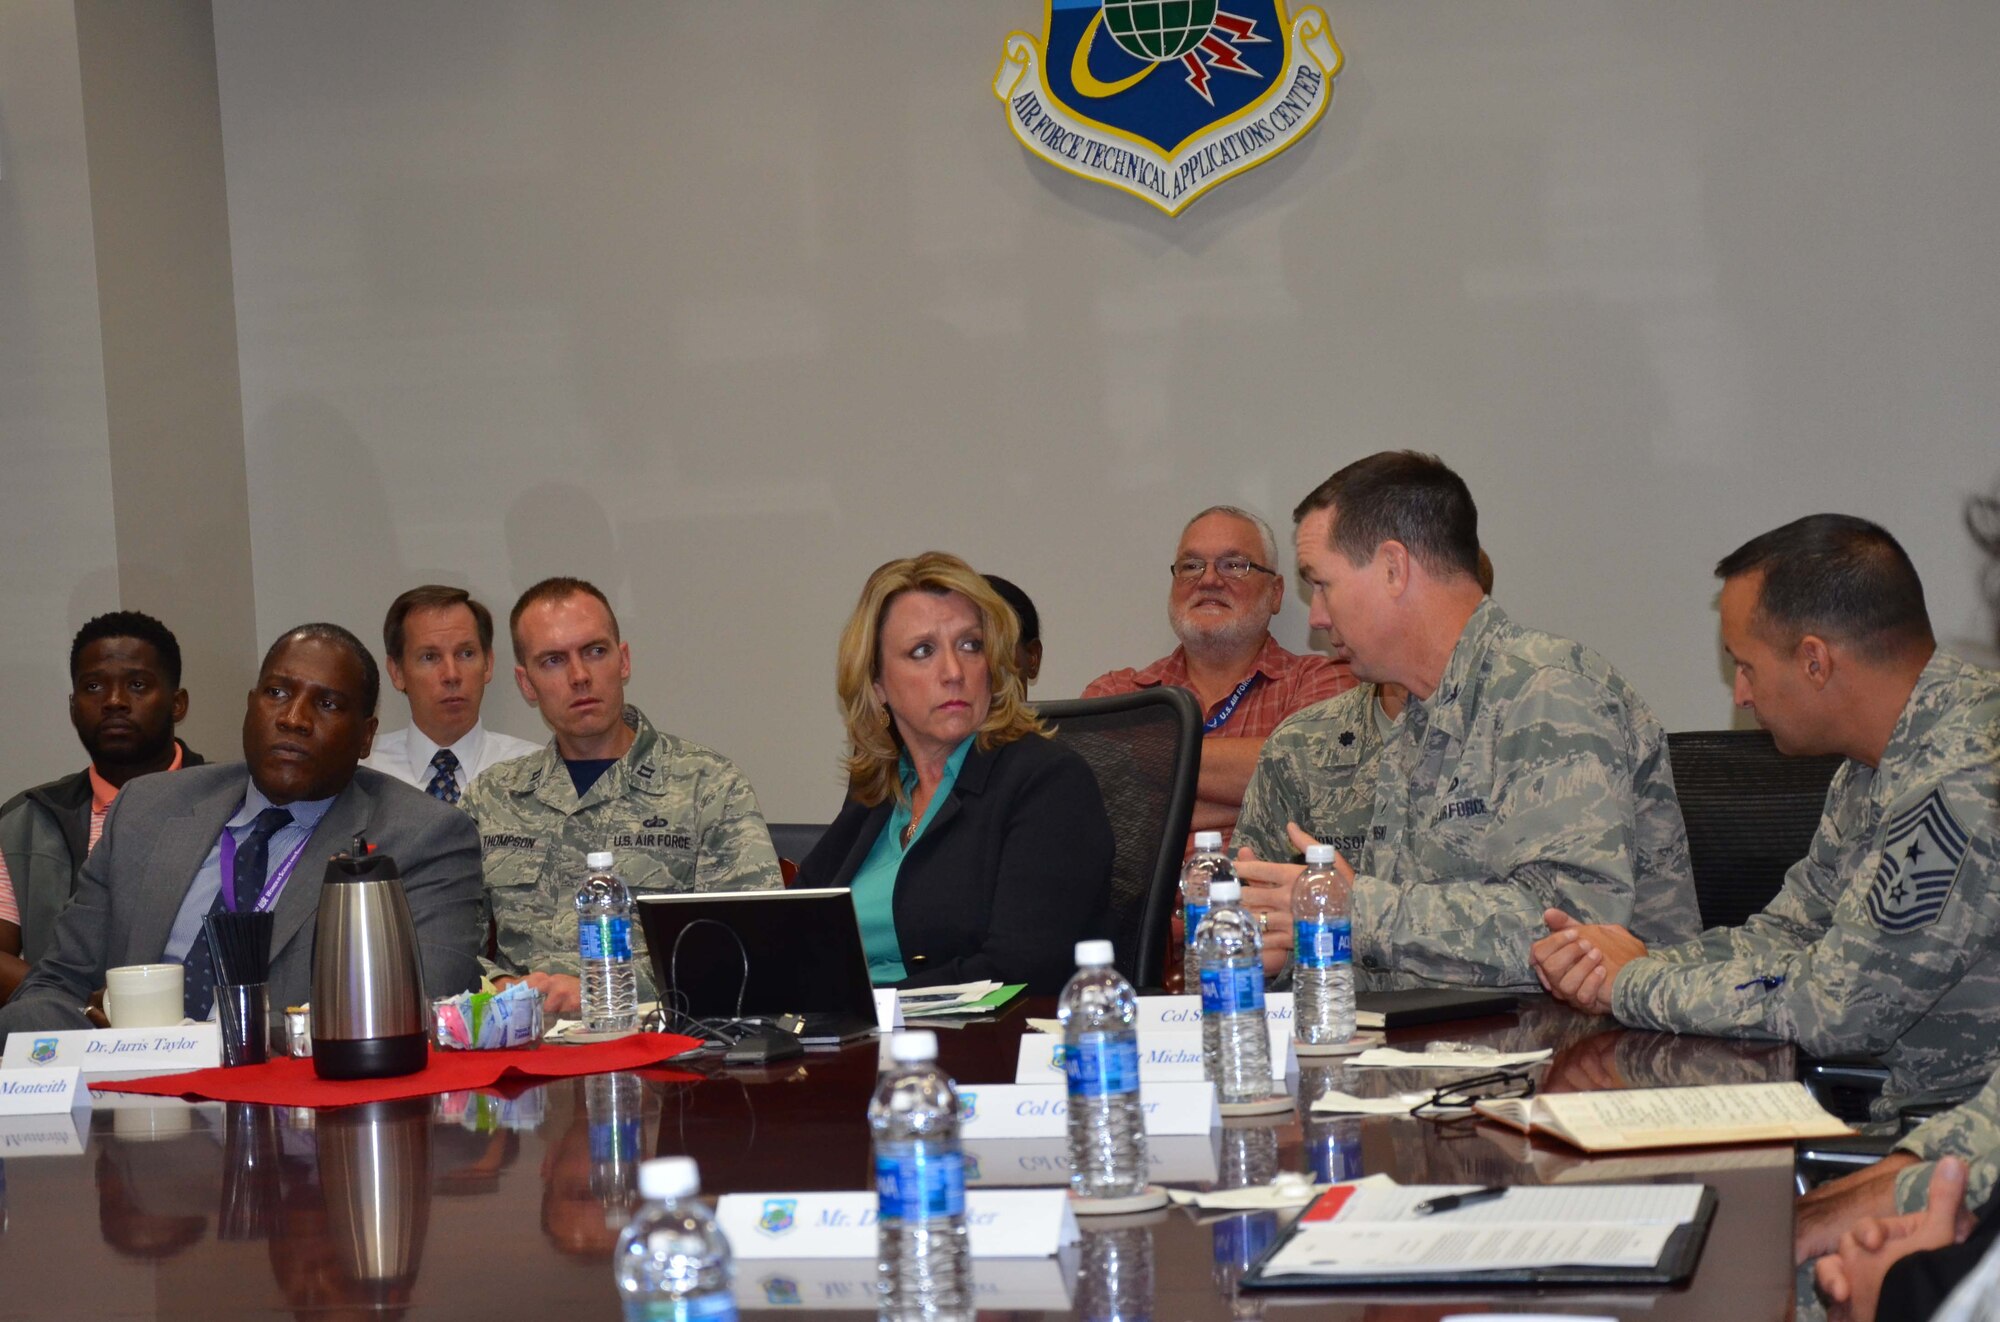 160909-SR919-001 -- Secretary of the Air Force Deborah Lee James listens to Col. Steven M. Gorski, commander of the Air Force Technical Applications Center, discuss the actions AFTAC has taken with regard to North Korea's purported nuclear test Sept. 9, 2016.  James was visiting Patrick AFB, Fla., to witness the launch of an Atlas V rocket and took time out of her schedule to get briefed by Gorski and his nuclear treaty monitoring experts about how the center measures seismic activity and compliance with nuclear treaties. The secretary was also briefed about the capabilities of the WC-135 Constant Phoenix, AFTAC's atmospheric collection aircraft that has been deployed to the region to collect accurate information on levels of potential radiation in the area of concern.  Pictured at the table from left to right:  Dr. Jarris Taylor, James' deputy assistant on Strategic Diversity Integration, James, Gorski, and Chief Master Sgt. Michael Joseph, AFTAC's Command Chief.
(U.S. Air Force photo by Susan A. Romano)